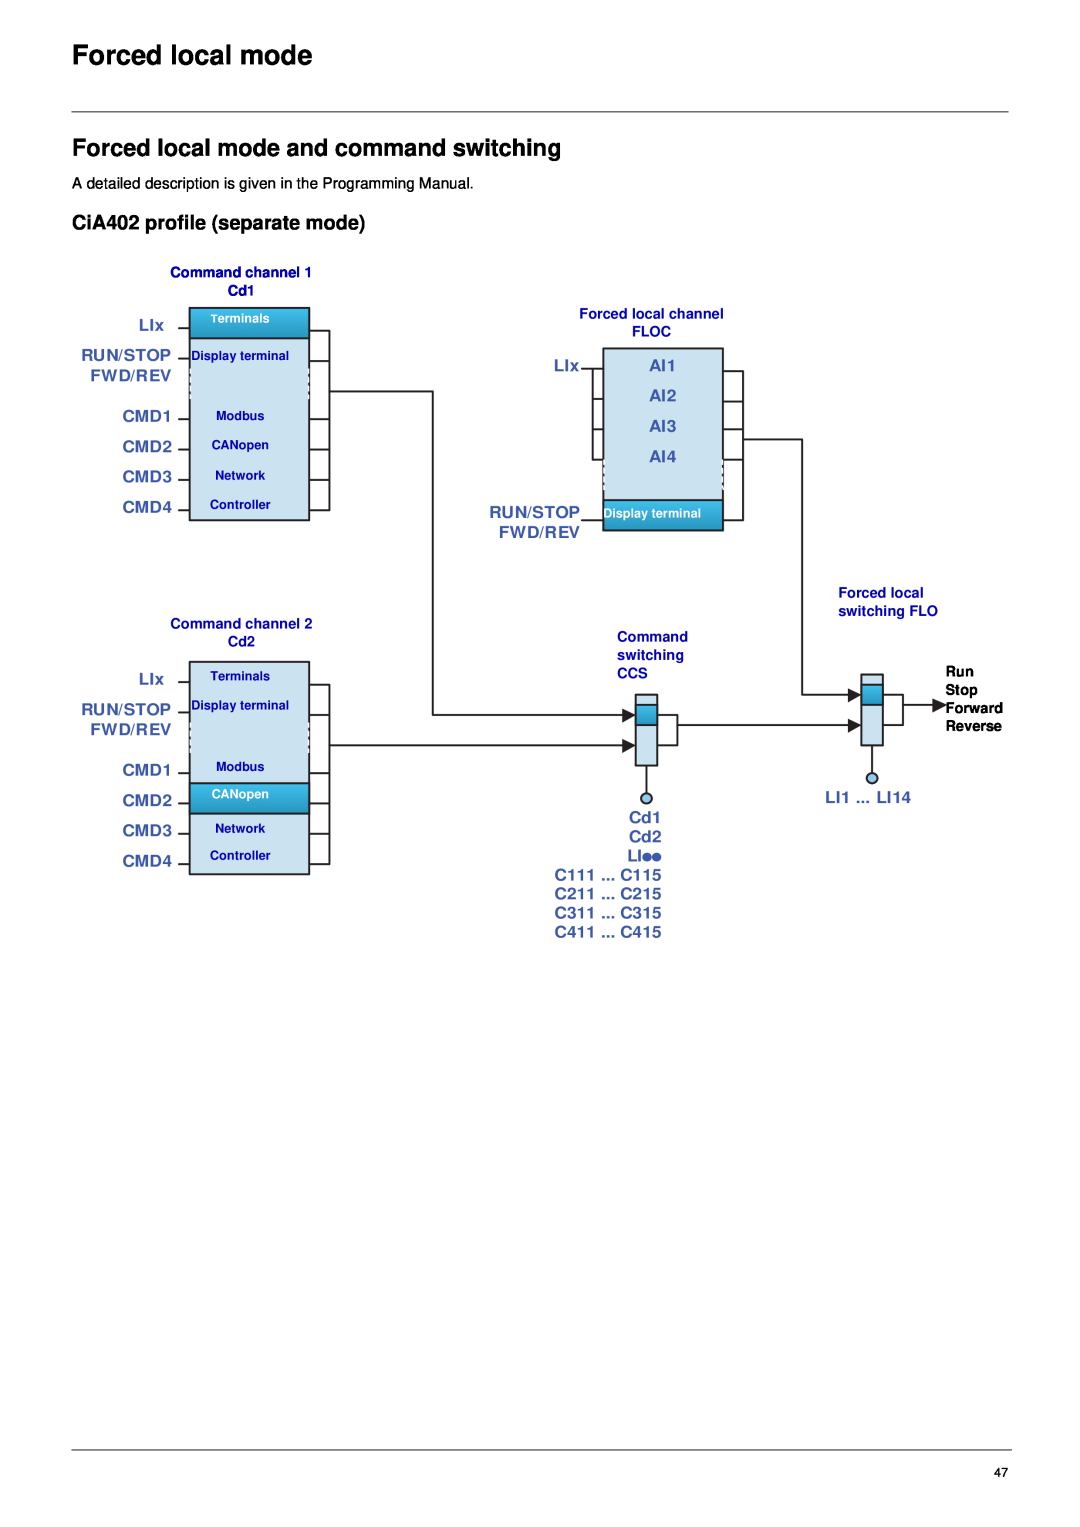 Schneider Electric 61 user manual Forced local mode and command switching, CiA402 profile separate mode 